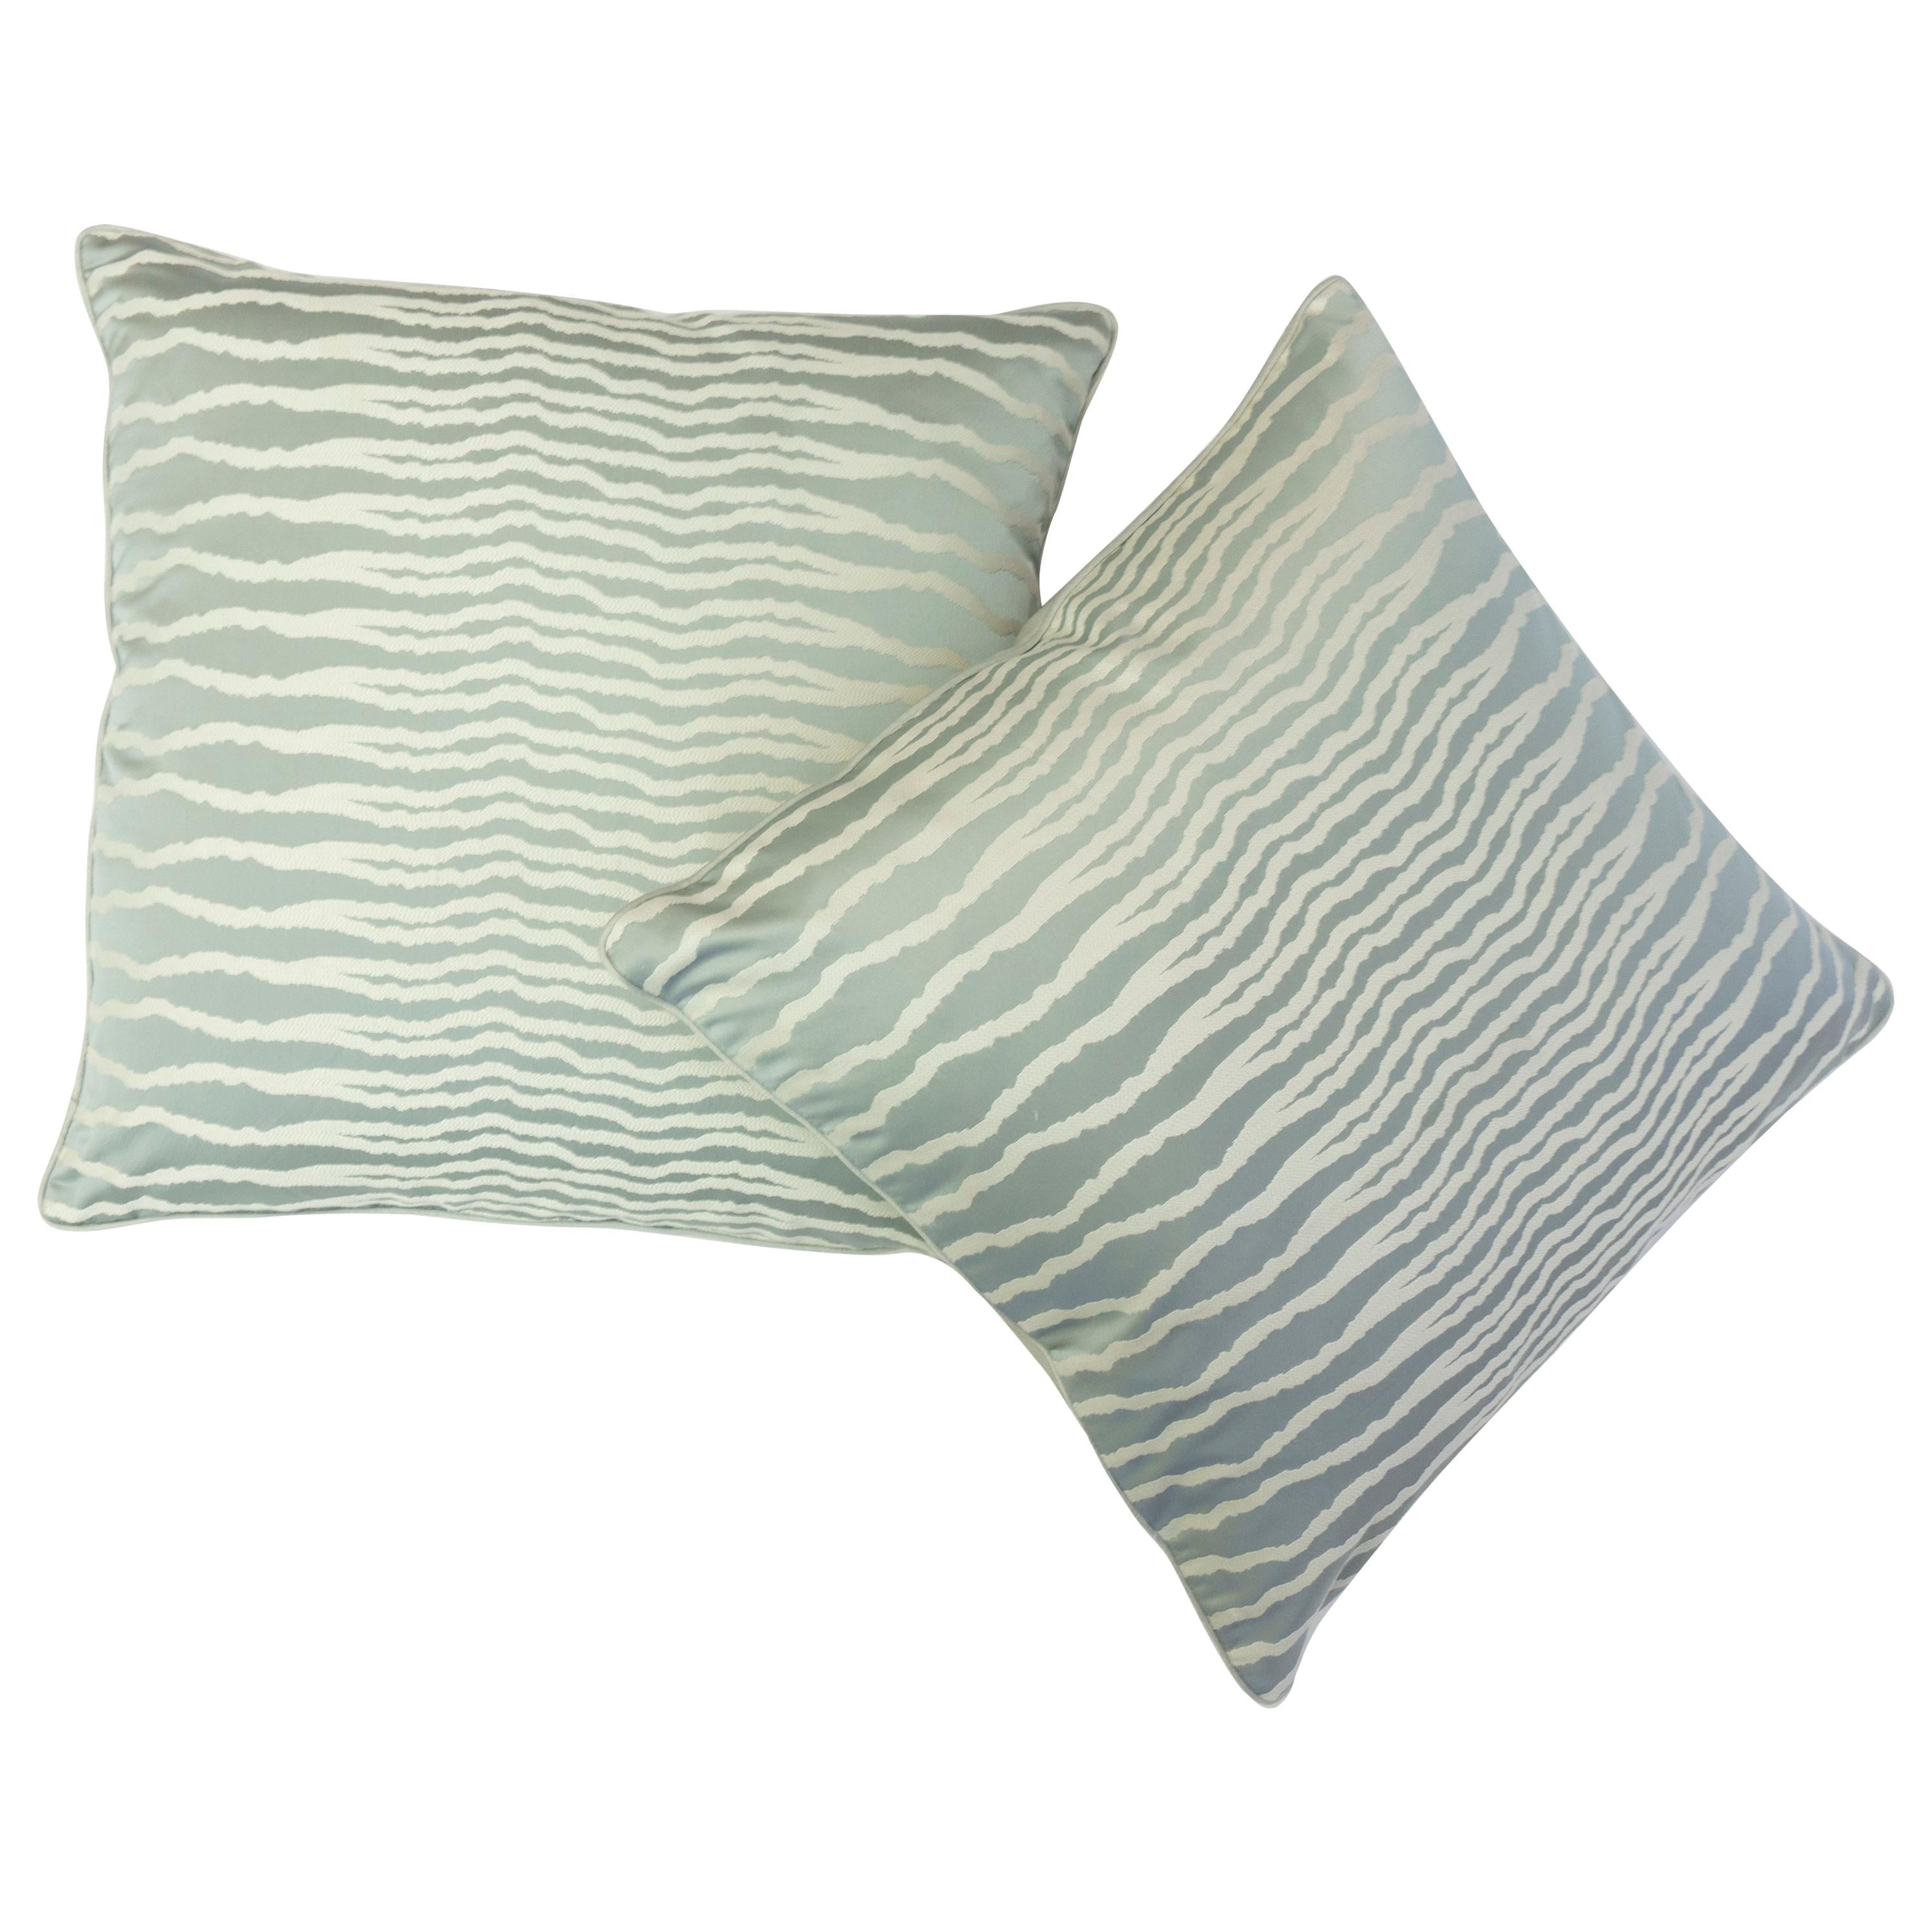 Throw Pillows with Jagged Stripes